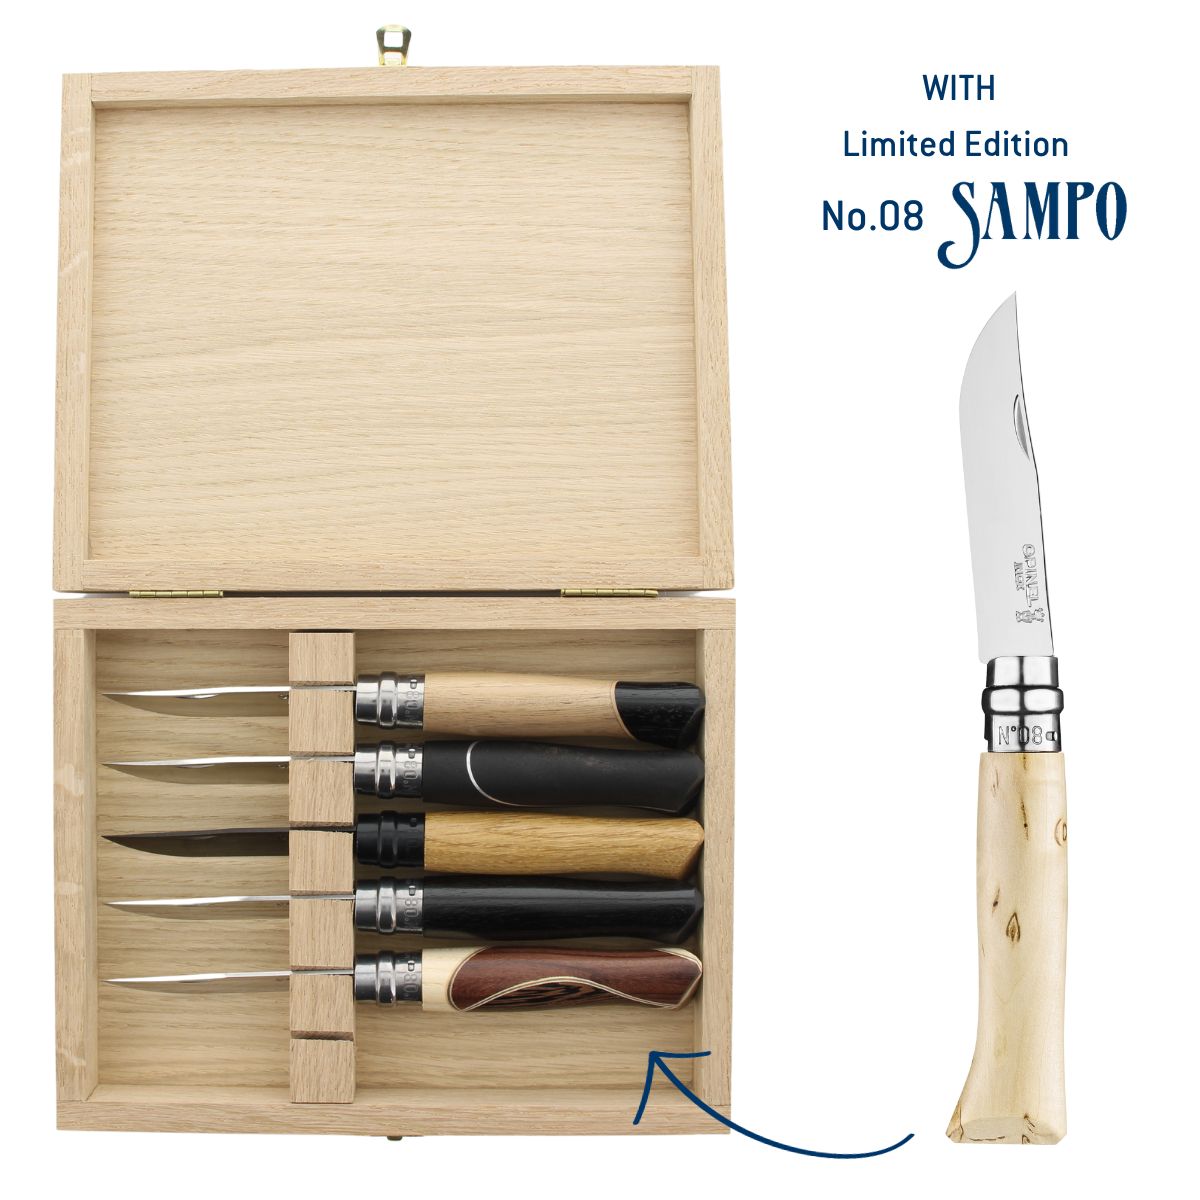 Opinel Romantique Wine & Oyster Collection, 2pcs